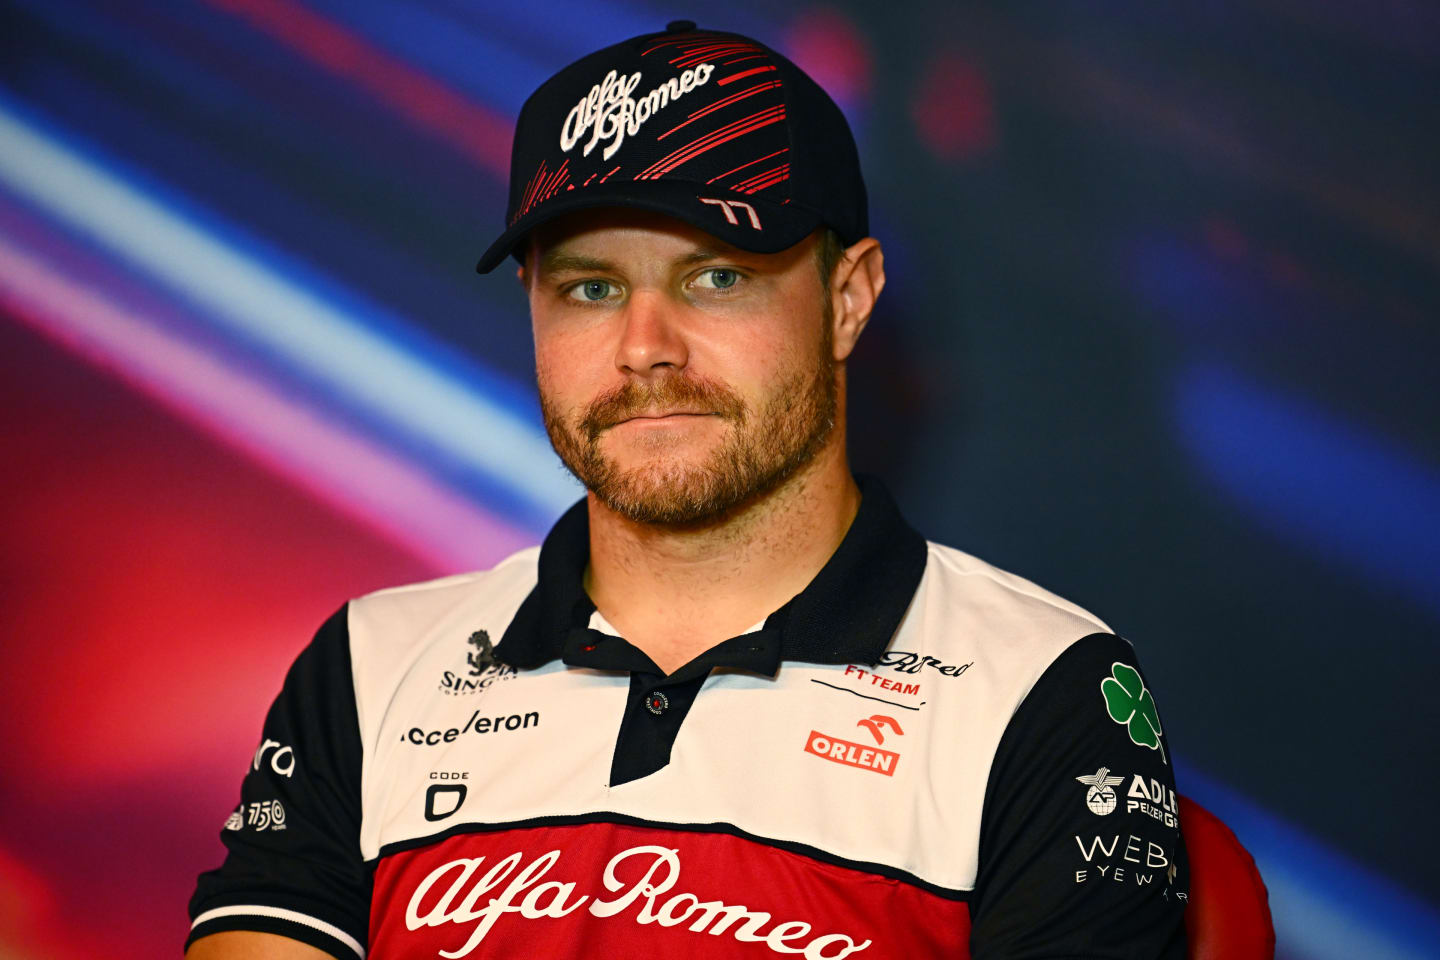 MONTREAL, QUEBEC - JUNE 17: Valtteri Bottas of Finland and Alfa Romeo F1 looks on in the Drivers Press Conference prior to practice ahead of the F1 Grand Prix of Canada at Circuit Gilles Villeneuve on June 17, 2022 in Montreal, Quebec. (Photo by Clive Mason/Getty Images)